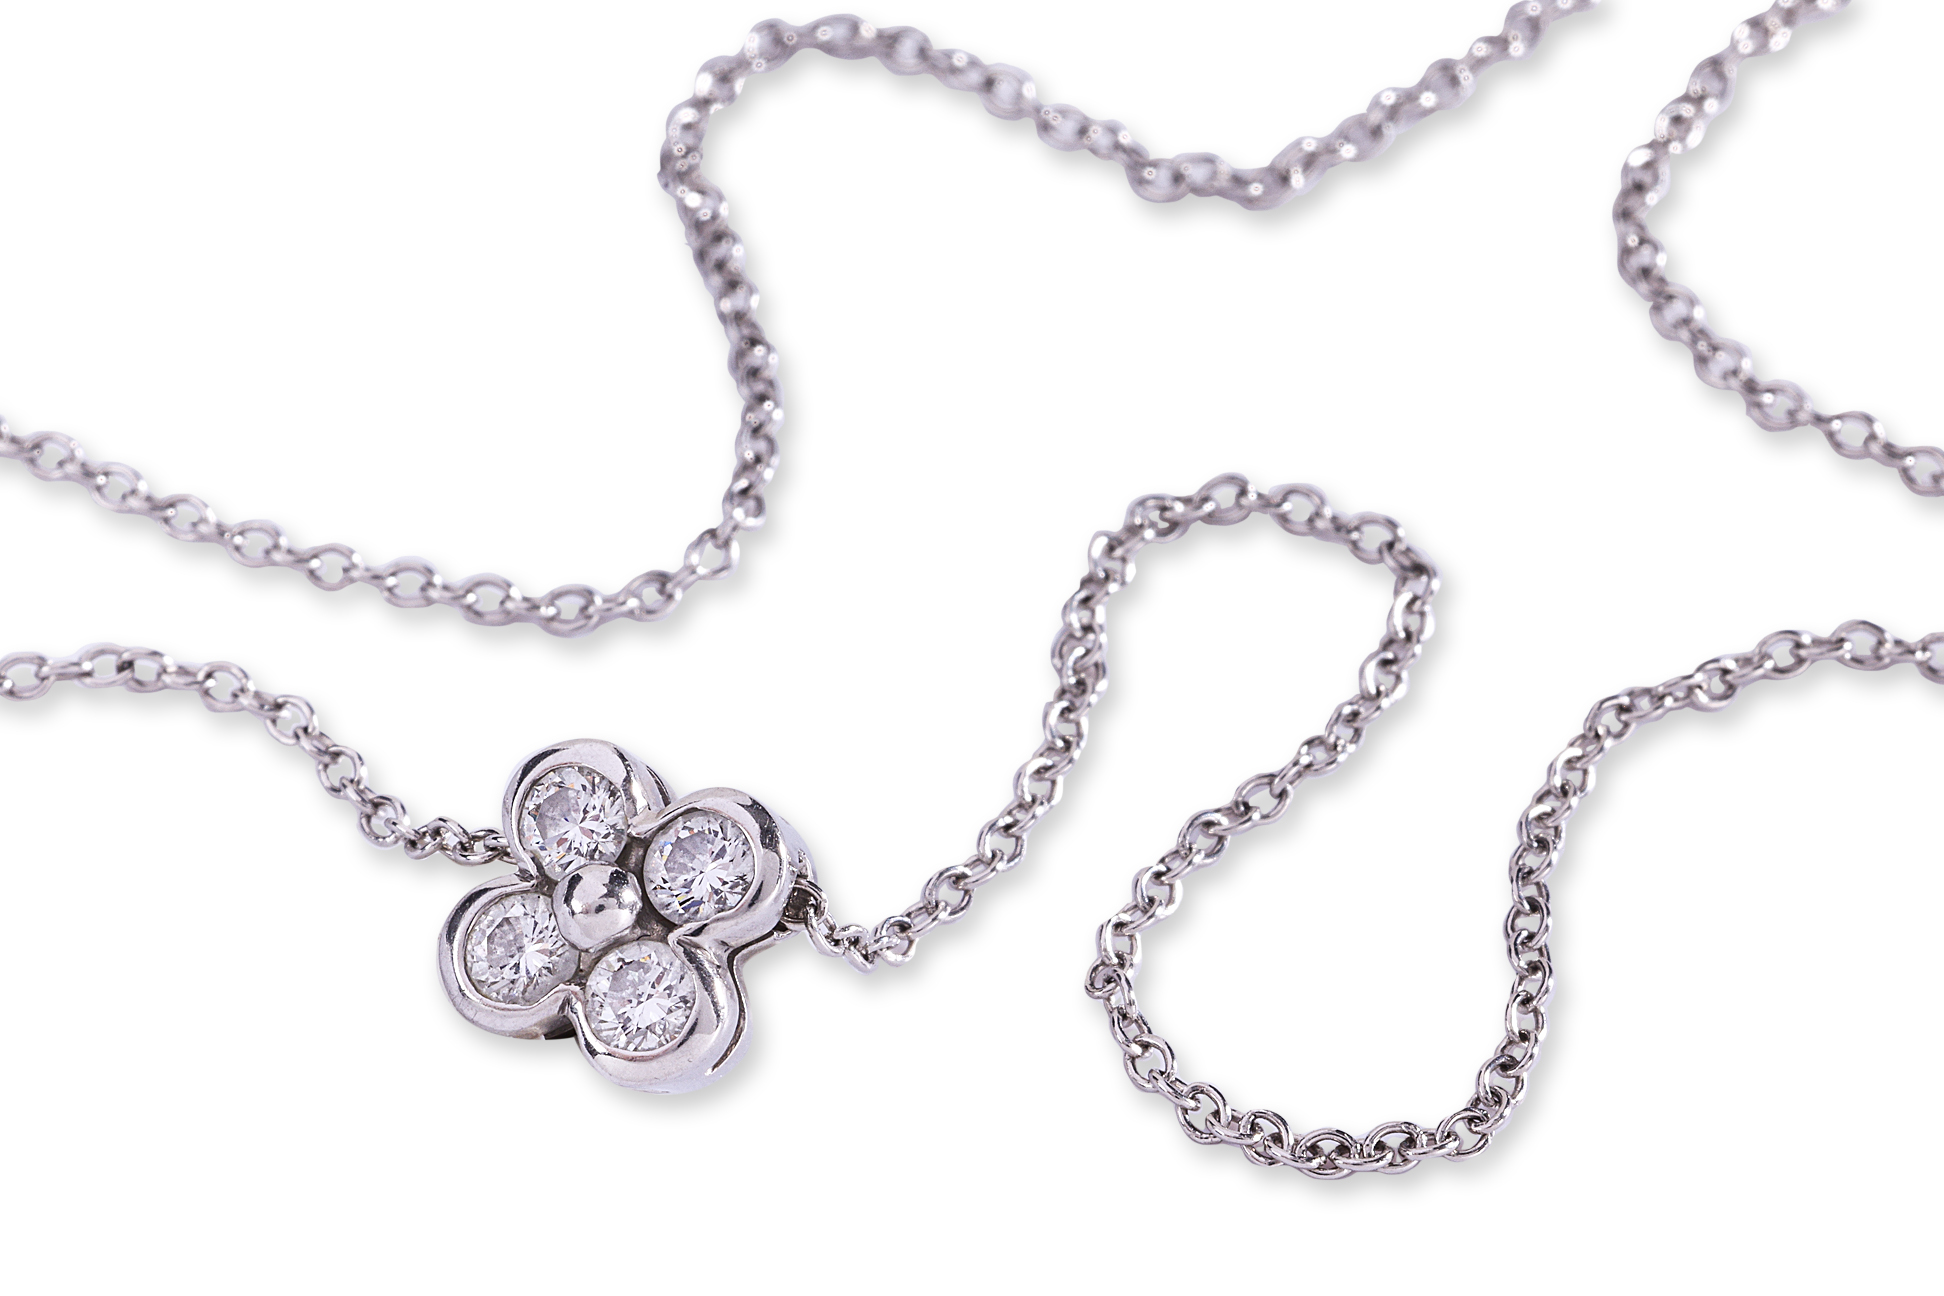 A DIAMOND 'CLOVER' PLATINUM NECKLACE BY TIFFANY & CO. - Image 2 of 3